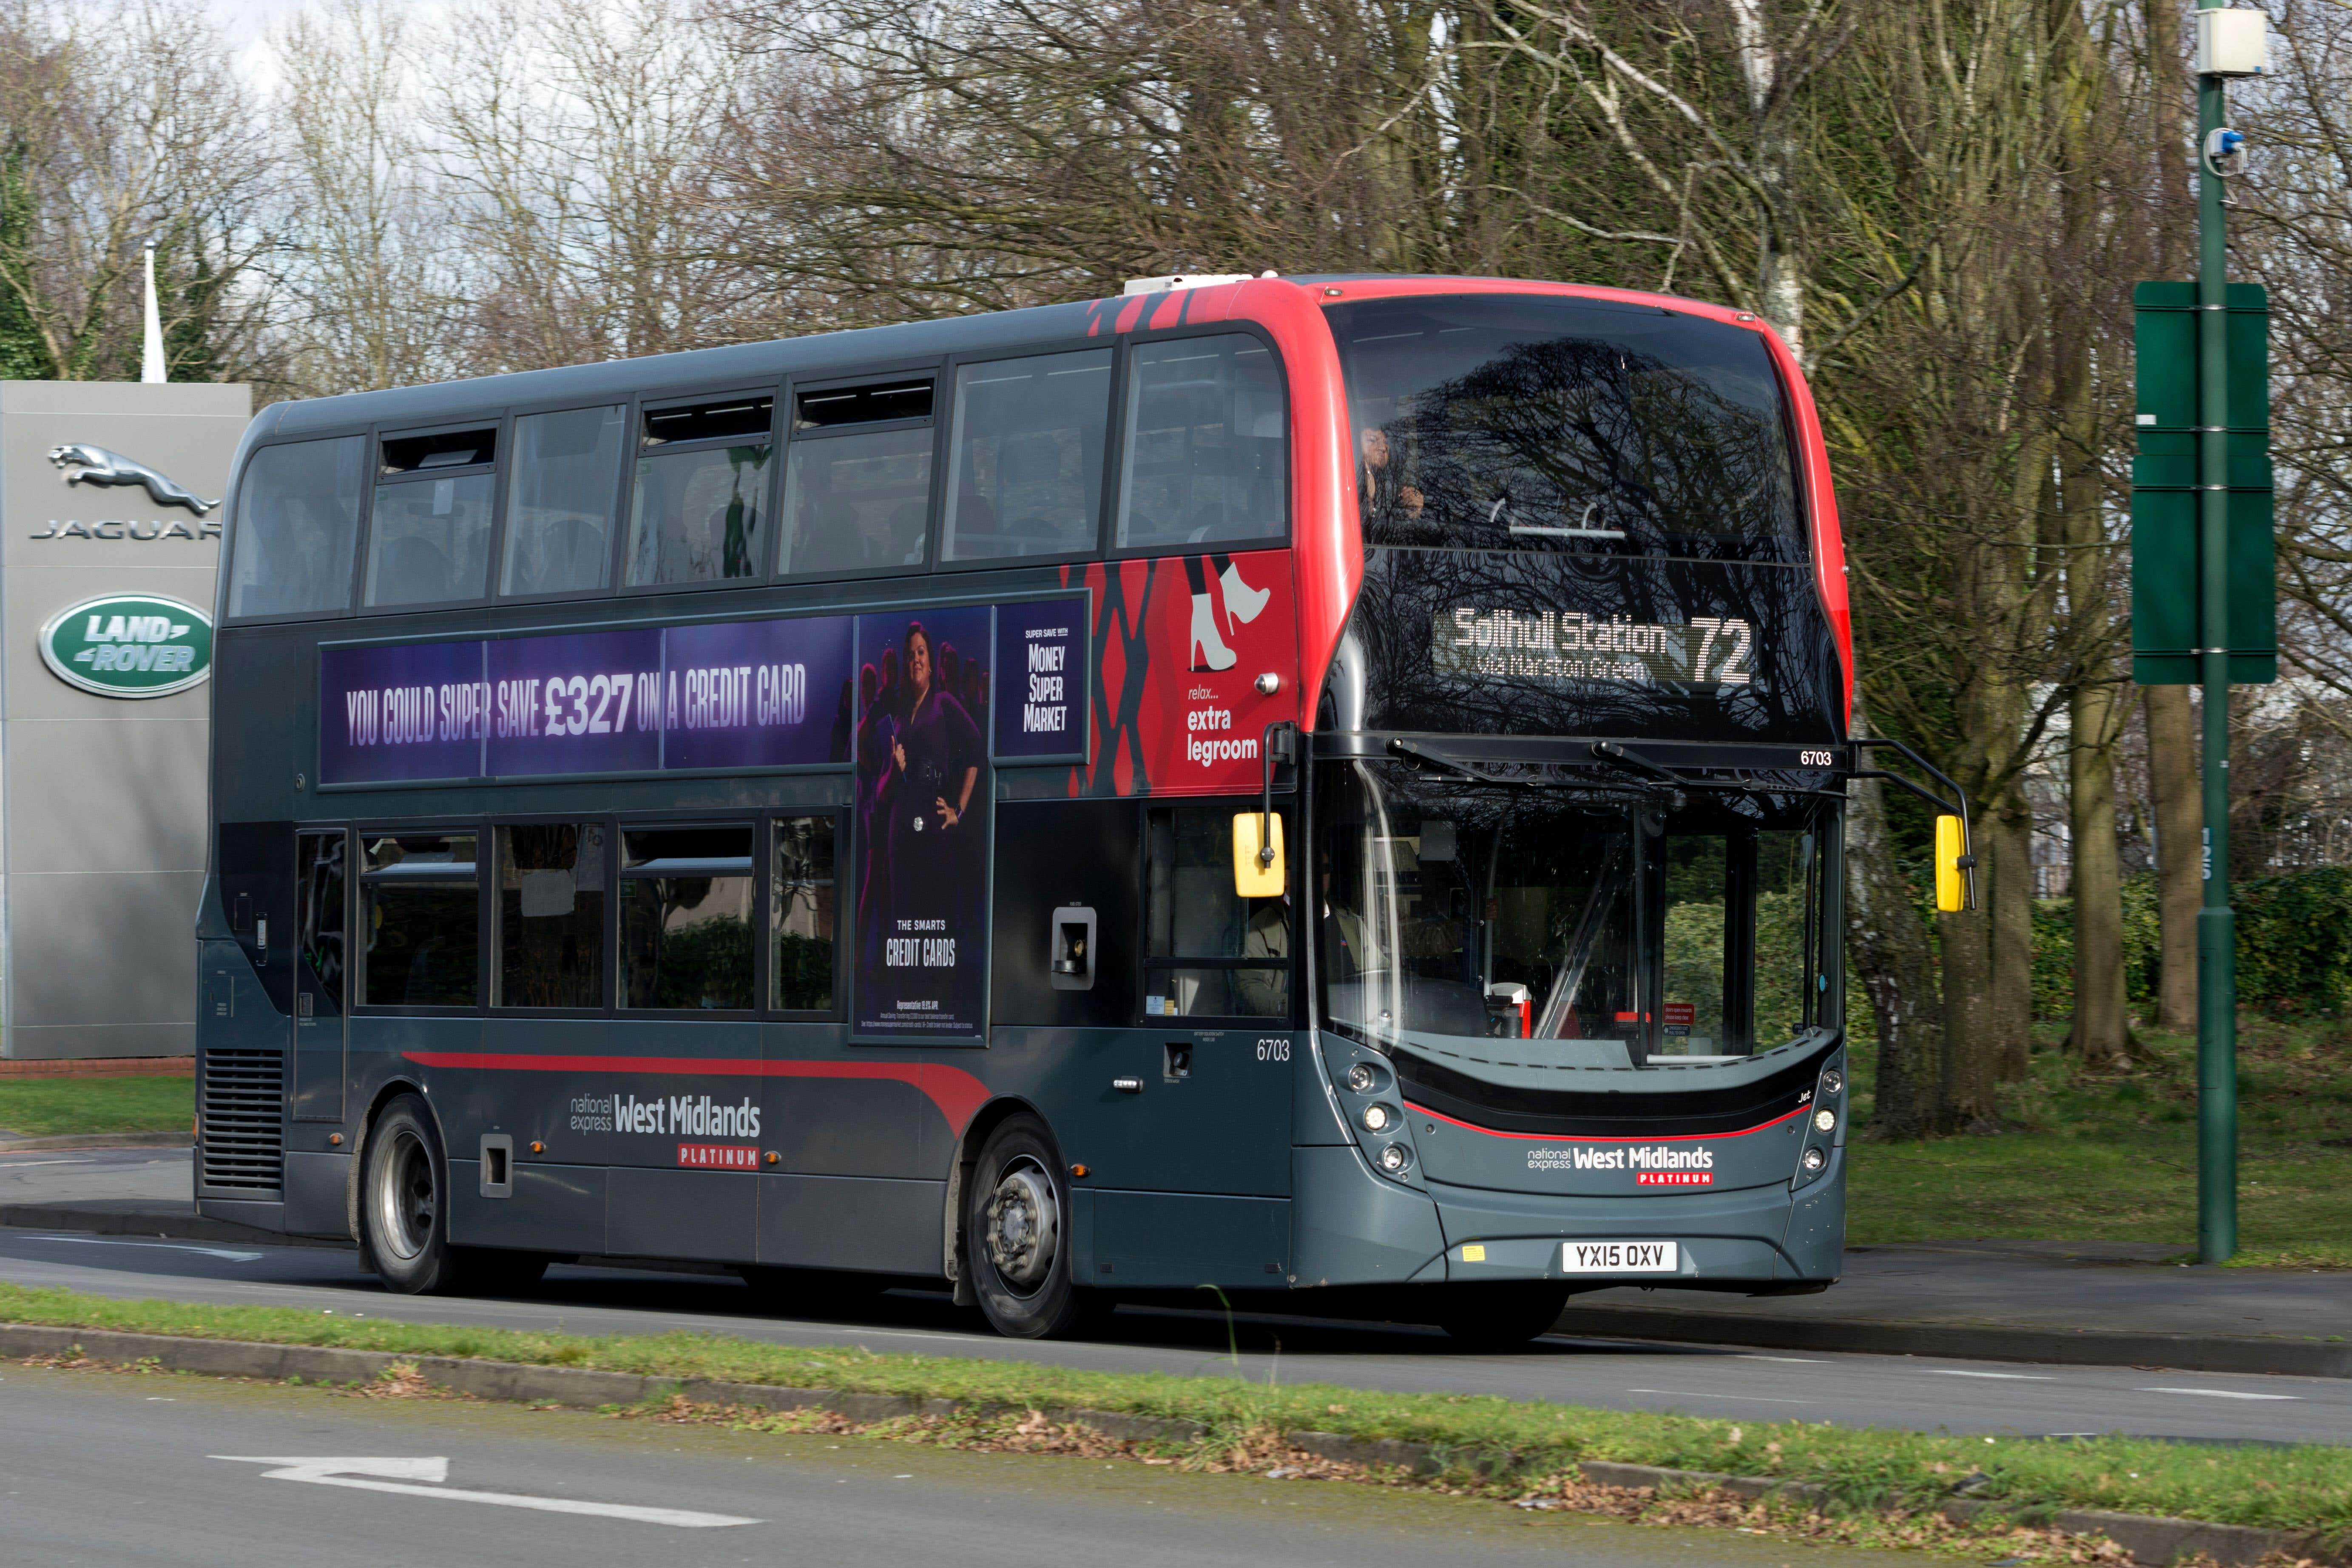 Plans to fix England’s ‘broken’ bus system have been unveiled by Labour (Colin Underhill/Alamy Stock Photo/PA)